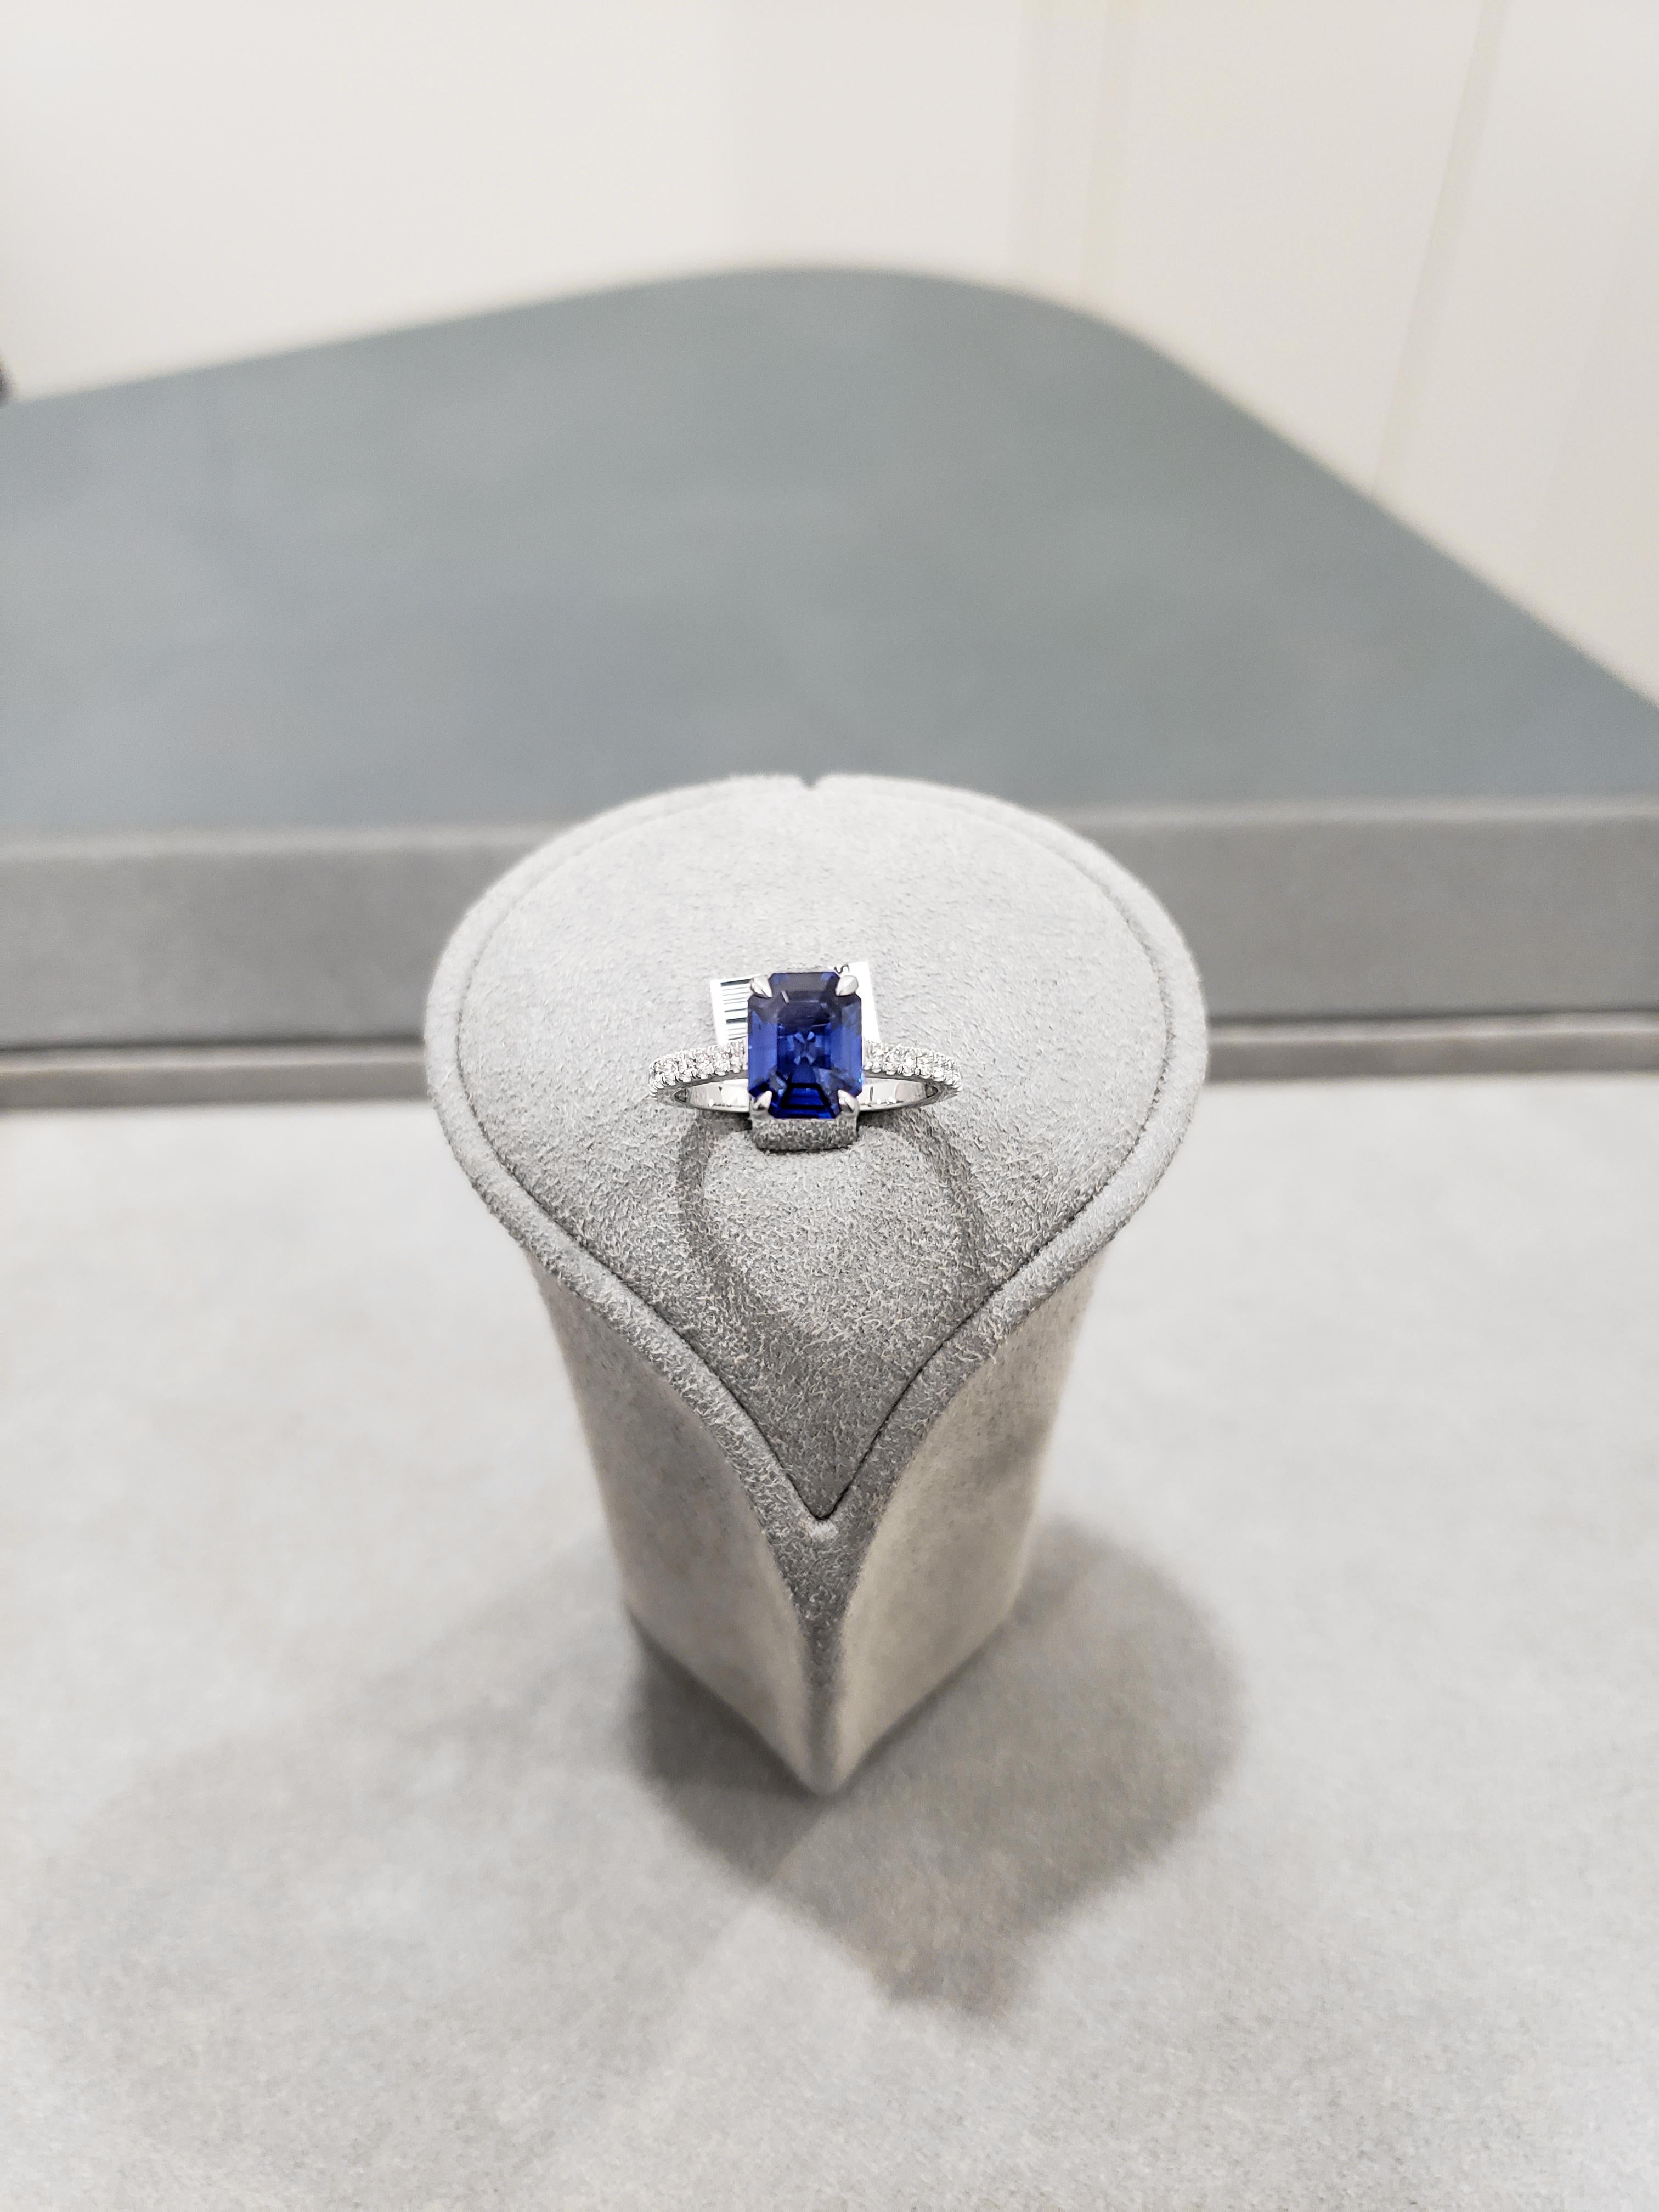 This sapphire ring is set with a 2.22 carat emerald cut blue sapphire set in a polished platinum shank accented with round brilliant diamonds. Diamonds weigh 0.26 carats.

Roman Malakov is a custom house, specializing in creating anything you can